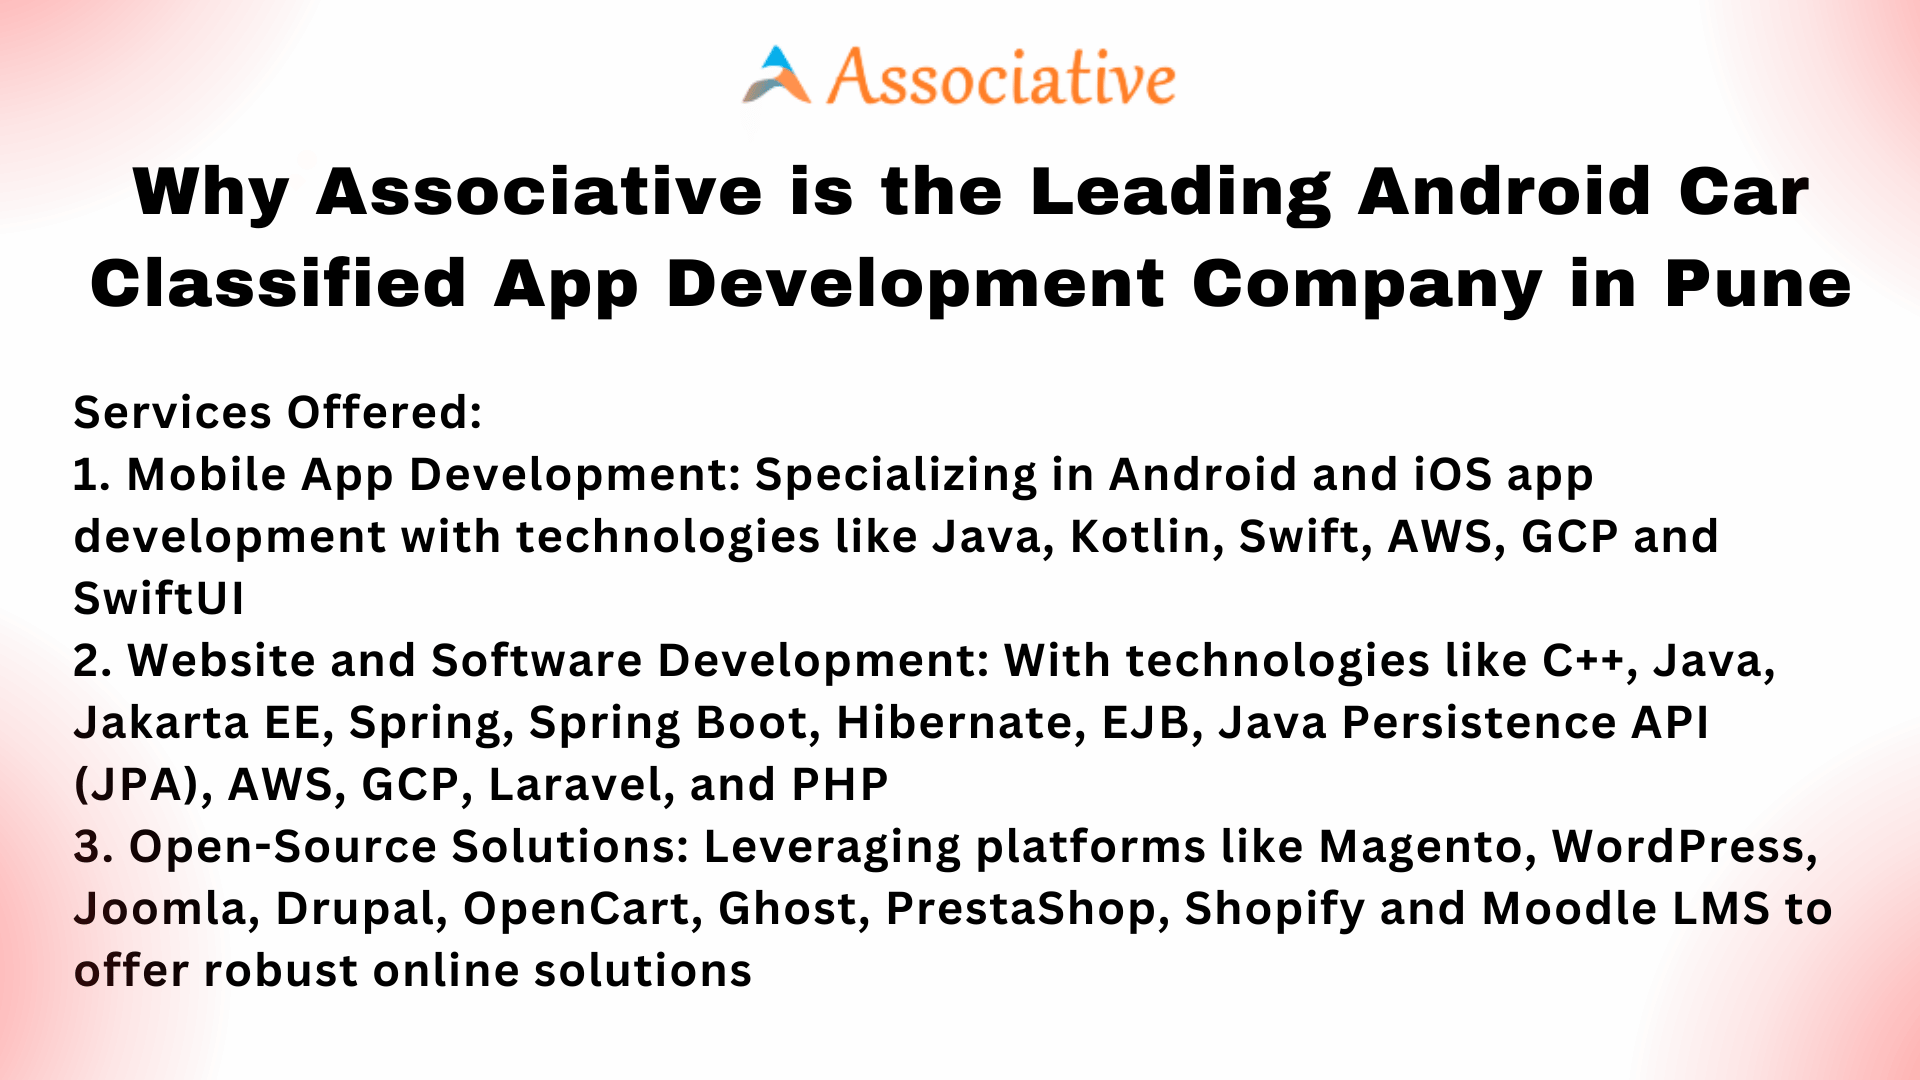 Why Associative is the Leading Android Car Classified App Development Company in Pune